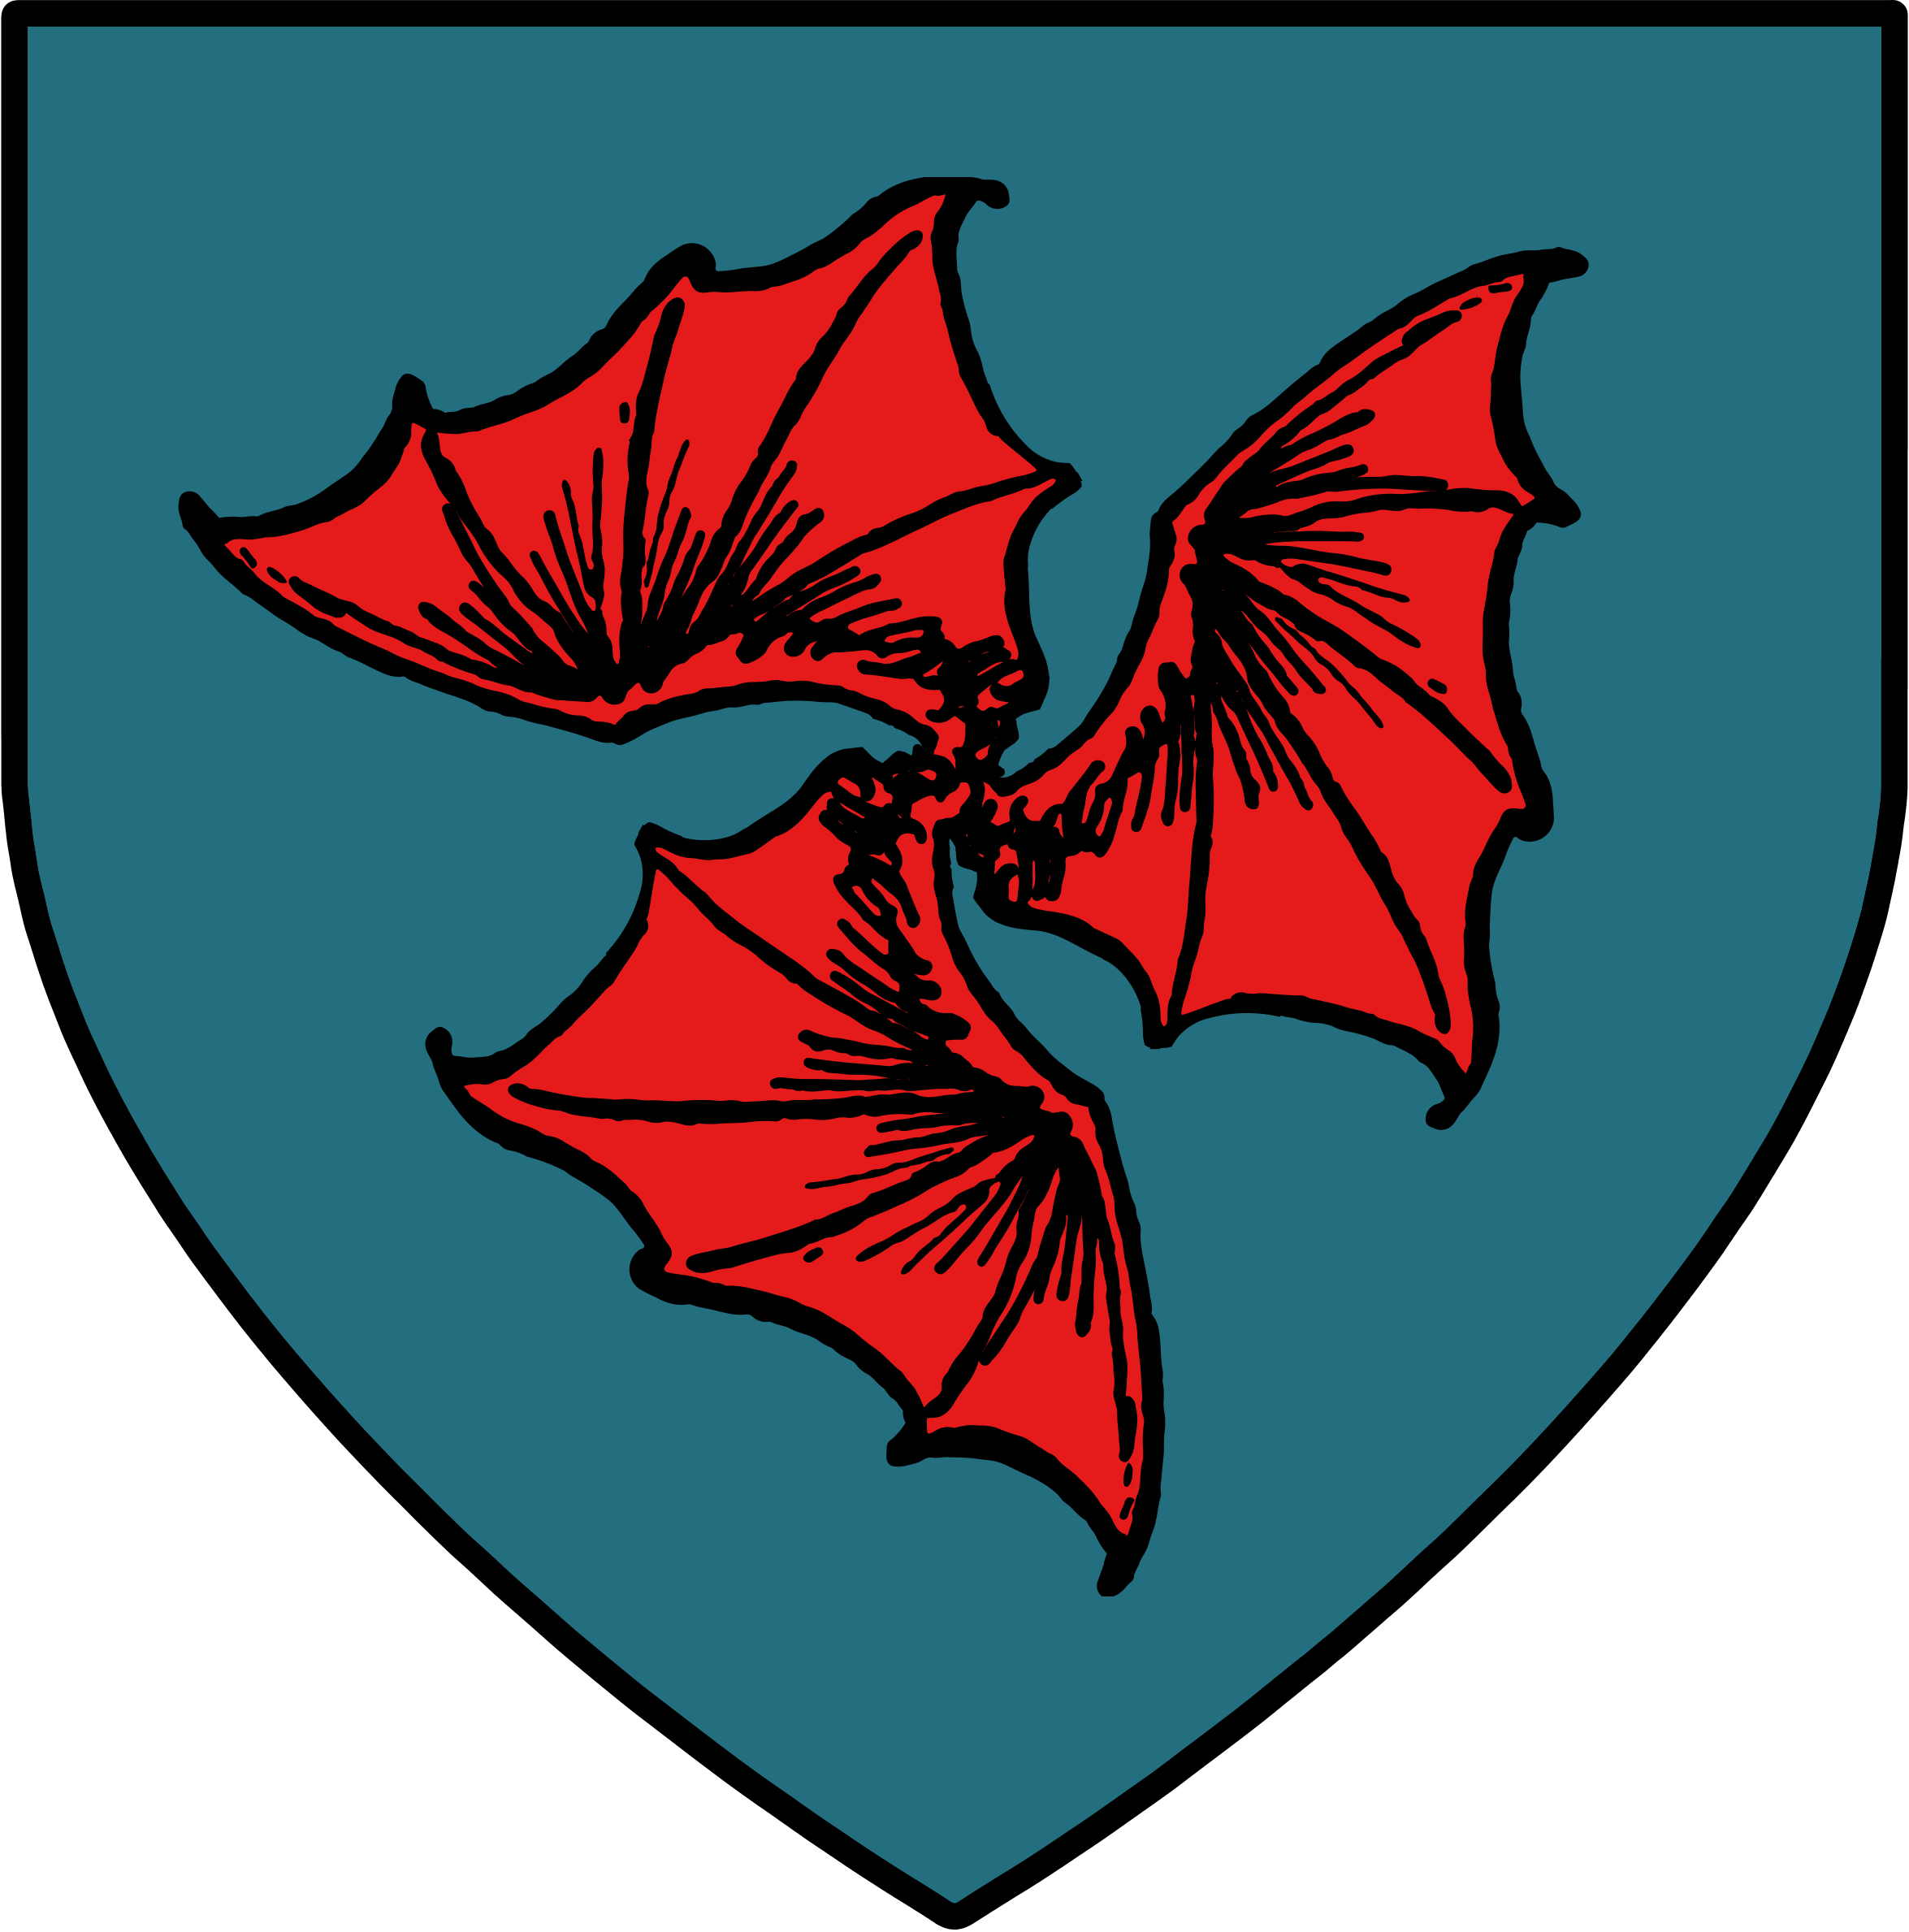 Isidore's Personal Coat of Arms